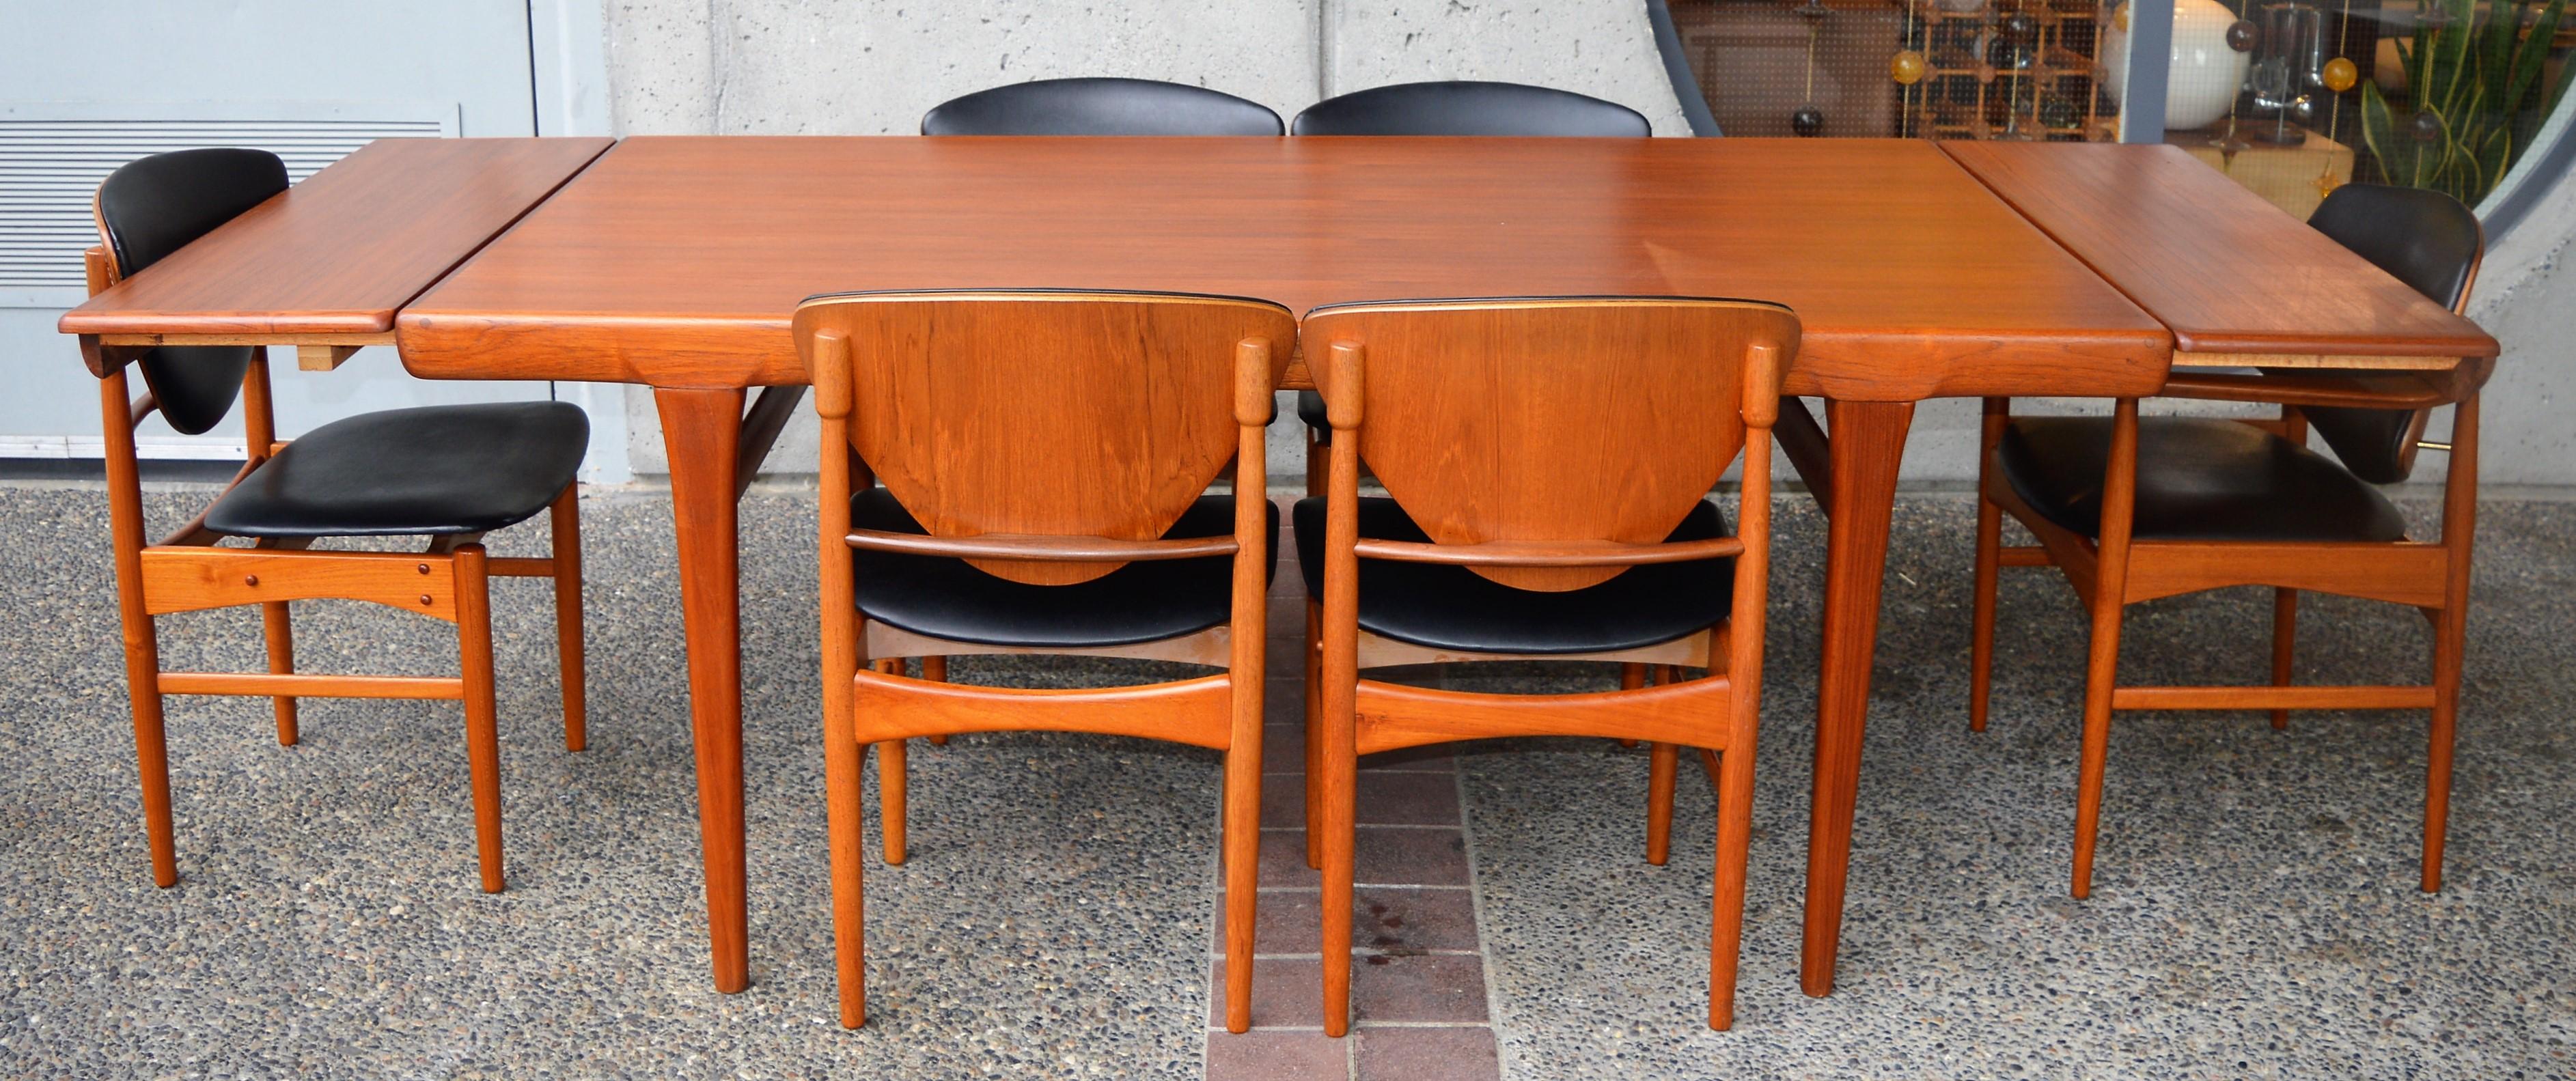 Mid-Century Modern Danish Teak Two-Leaf Dining Table by Kofod Larsen with His Iconic Leg Detail